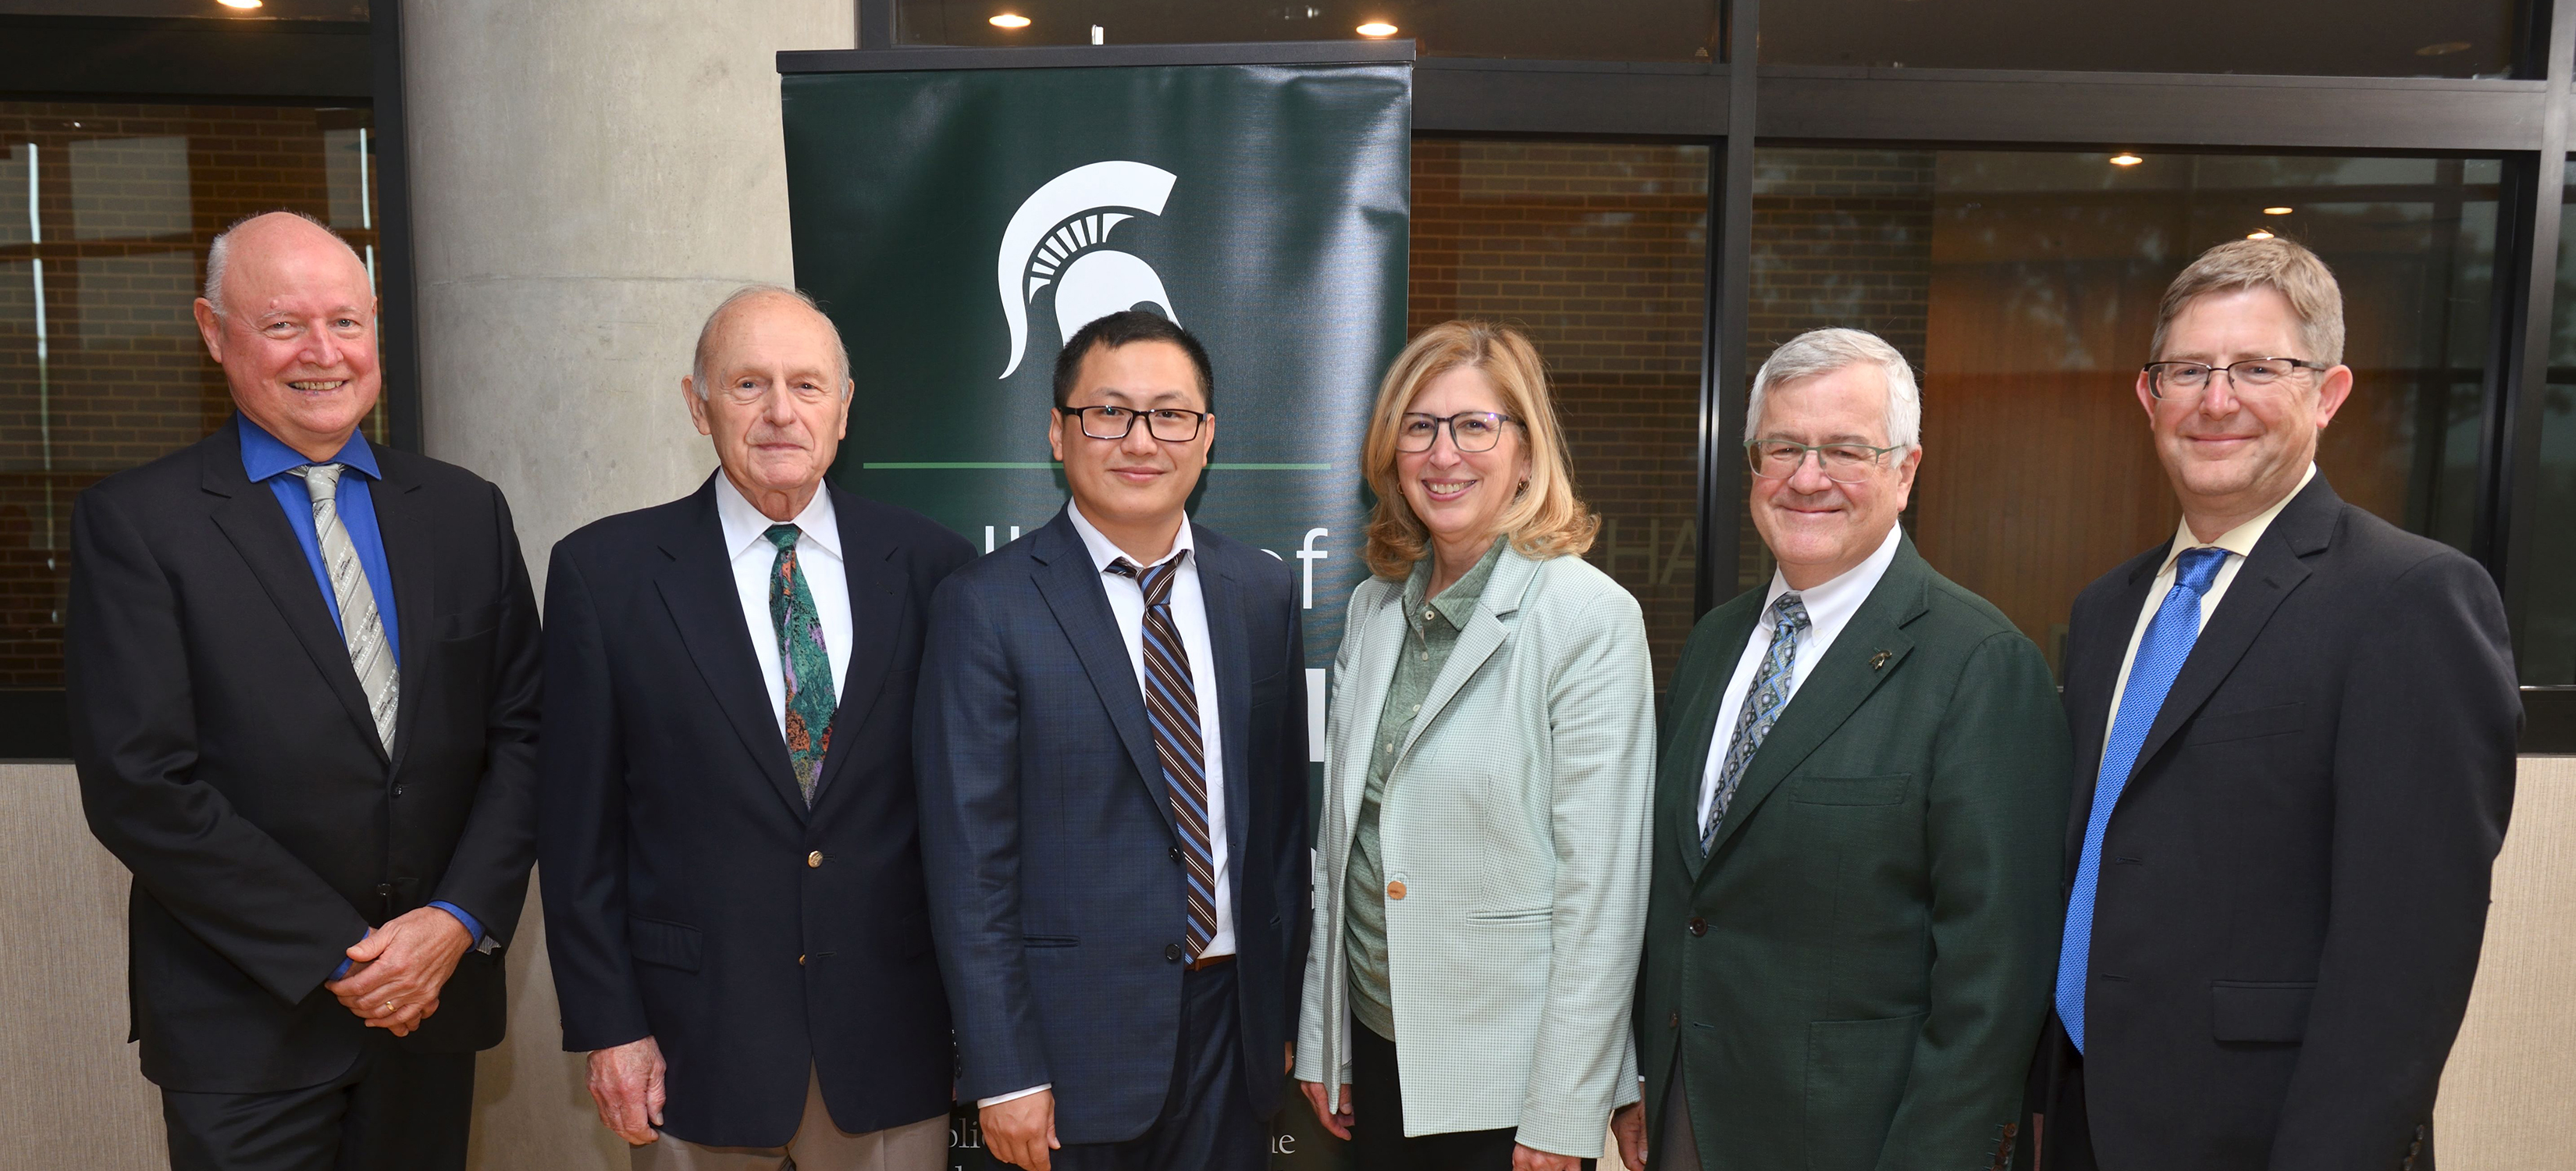 (L to R): Phil Duxbury, NatSci dean; Jim Hoeschele, donor, Carl H. Brubaker Endowed Professorship; Tuo Wang, Carl H. Brubaker, Jr. Endowed Professor; Teresa K. Woodruff, MSU interim president; Tom O’Halloran, University Foundation Professor of Chemistry; and Tim Warren, Barnett Rosenberg Professor and chair of the Department of Chemistry, pose for a group photo following Wang’s investiture ceremony to honor him as the inaugural Carl H. Brubaker, Jr. Endowed Professor. Credit: Harley J. Seeley